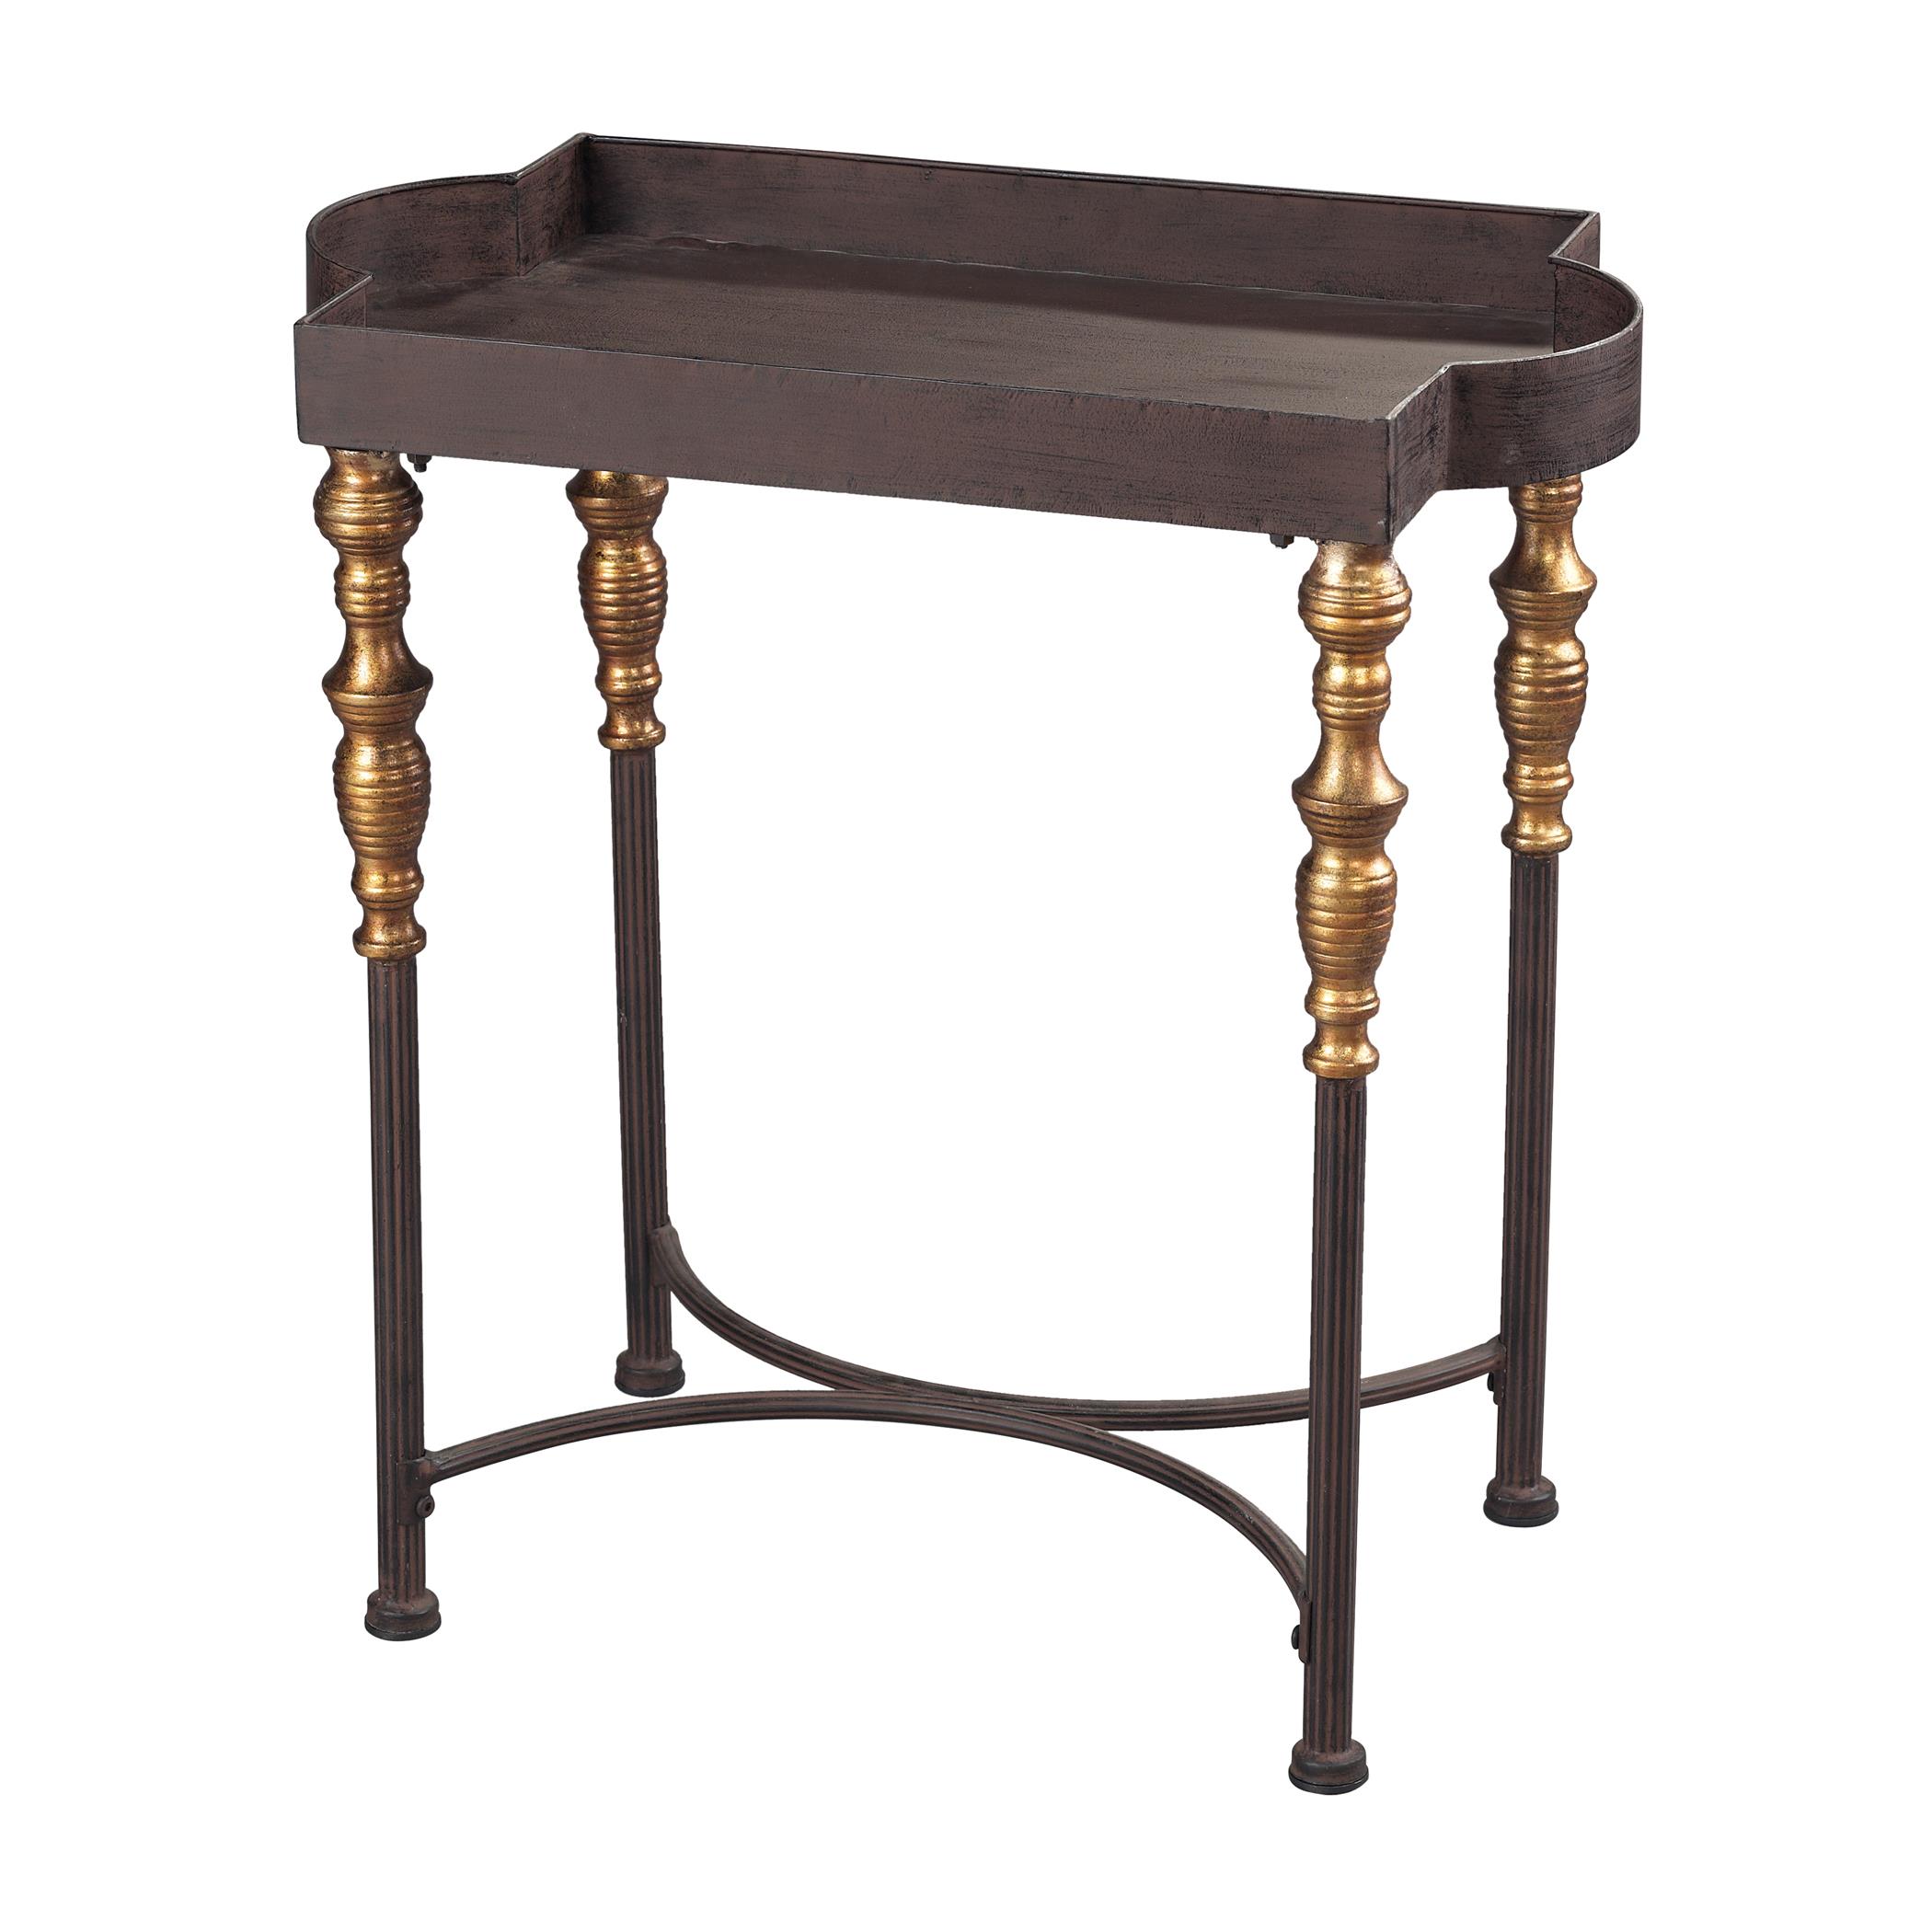 dudley accent table dark bronze gold small nesting tables metal pottery barn glass console kitchen with chairs dining furniture ashley white dresser outdoor wrought iron pier